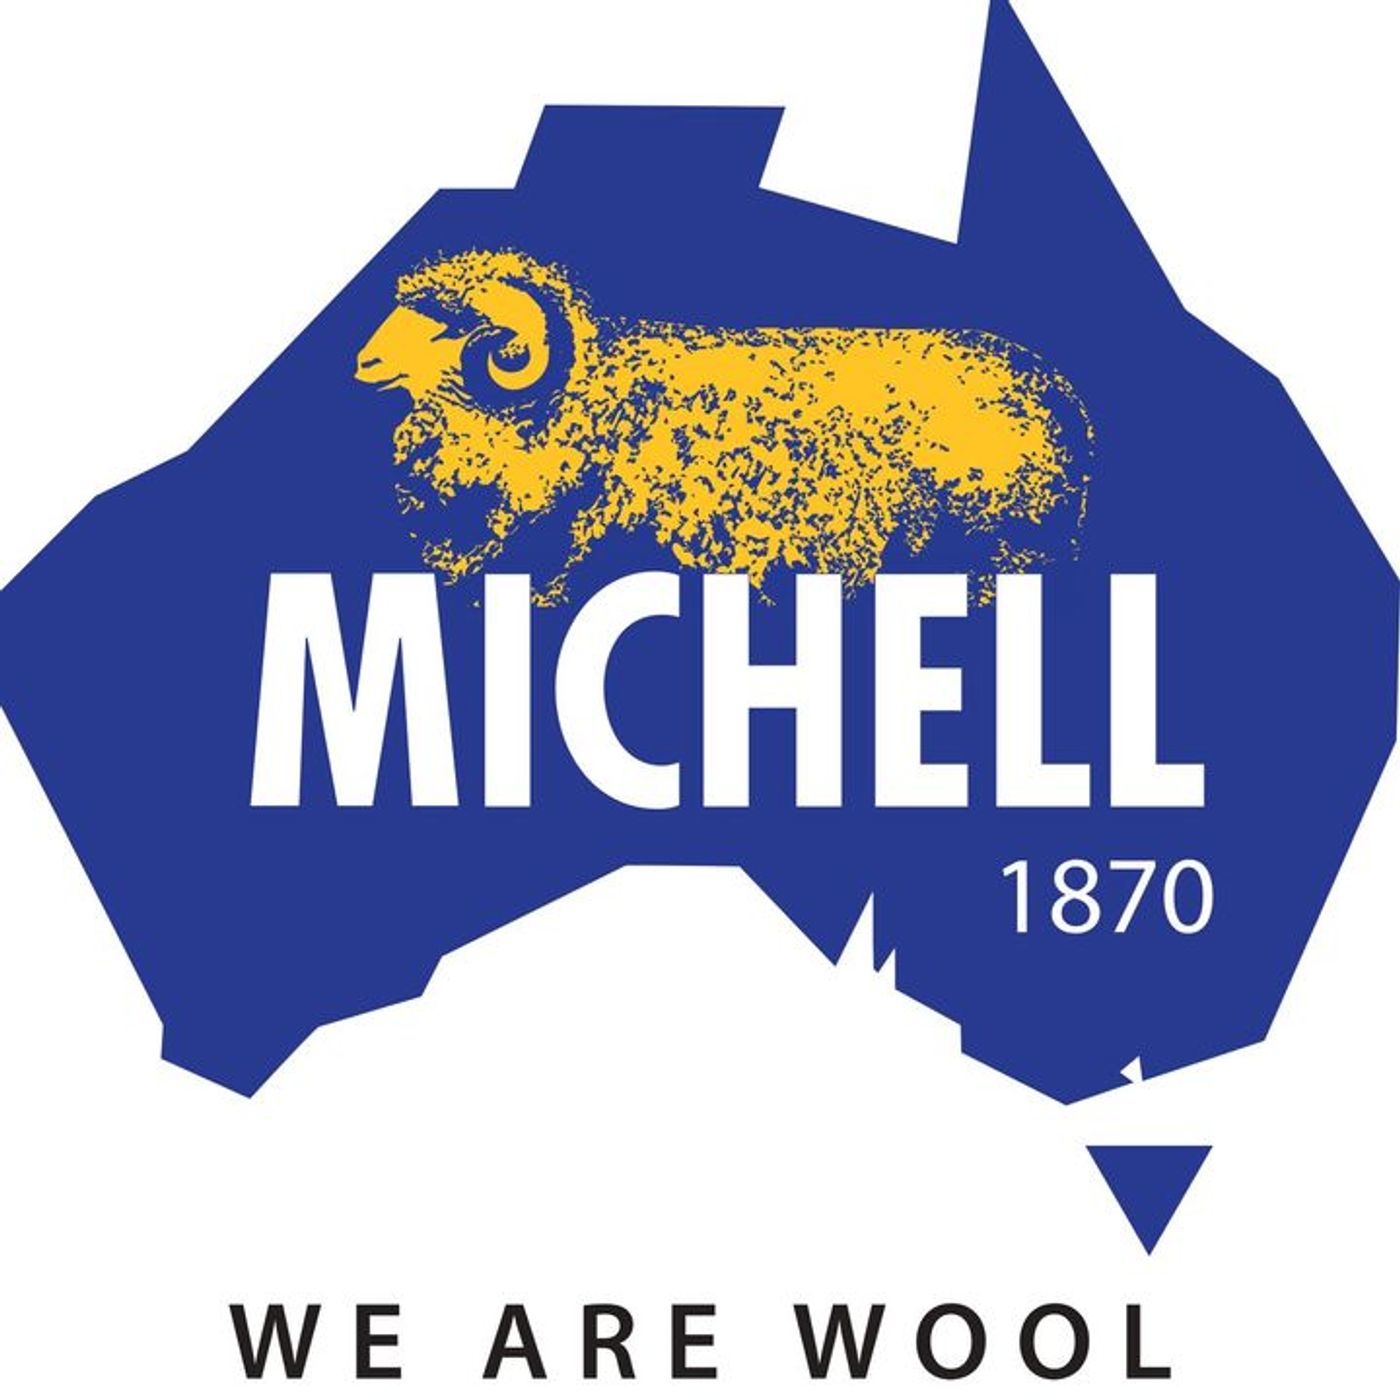 Stability the overriding feeling as Andrew Partridge updates Flow listeners on the latest from the wool markets